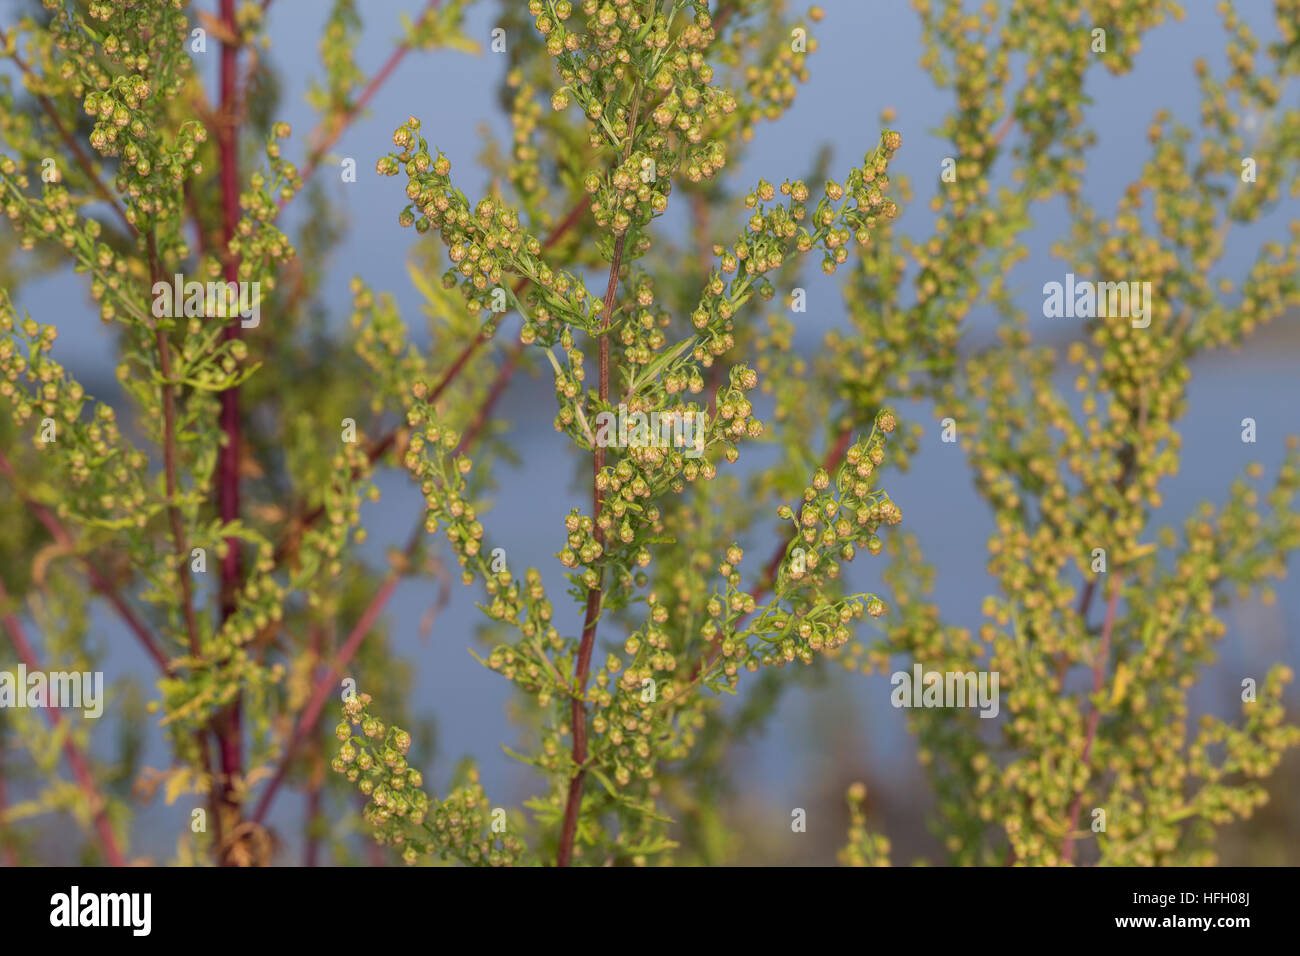 Artemisia annua (Sweet Wormwood) with green leaves and small yellow  flowerheads on stems Stock Photo - Alamy